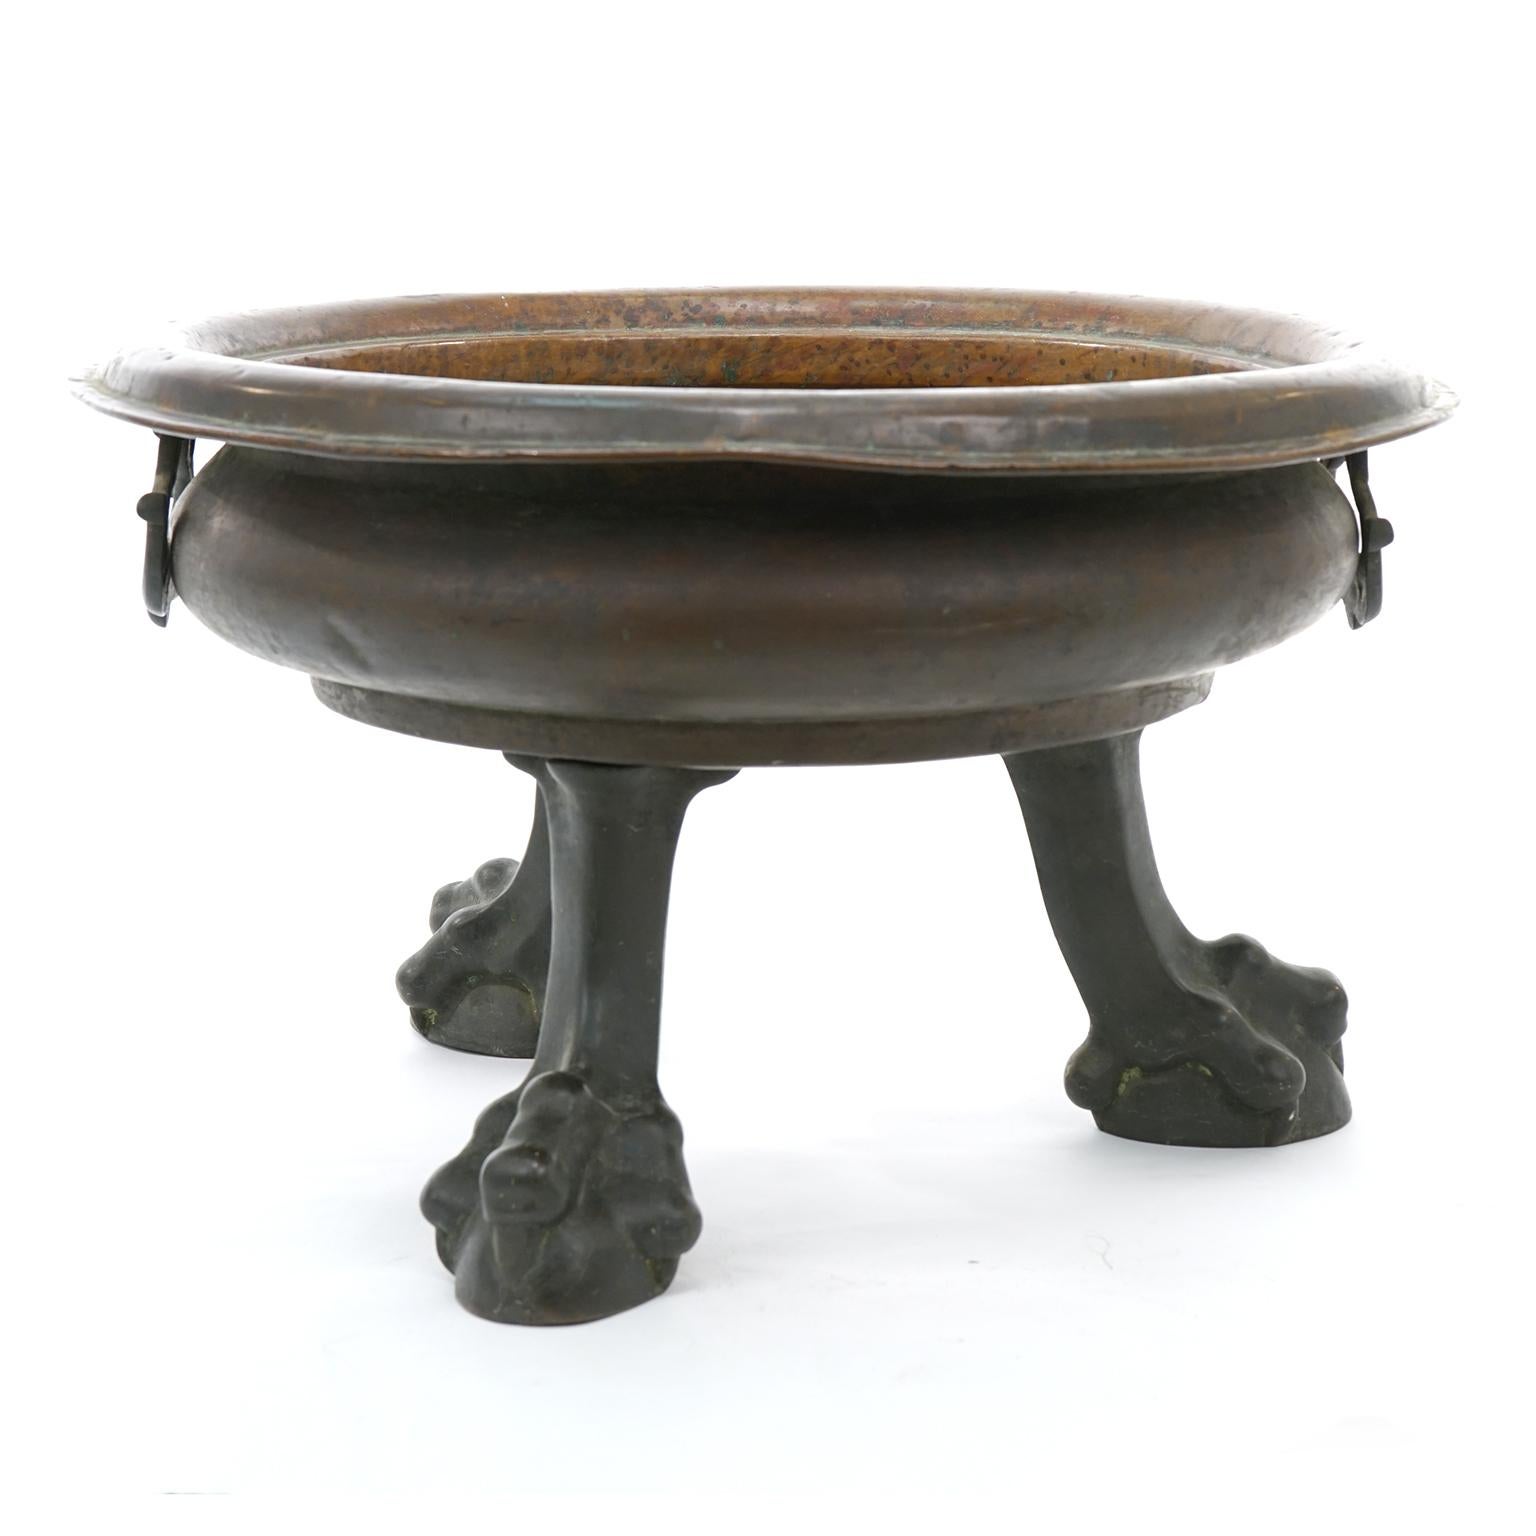 Straits Chinese, copper and bronze, circa 1820s. This fabulous planter is perfect as a centerpiece or lined and pressed into service as a wine cooler. At 14 inches tall and 23 inches in diameter, it is an impressive size. The bowl is hand worked